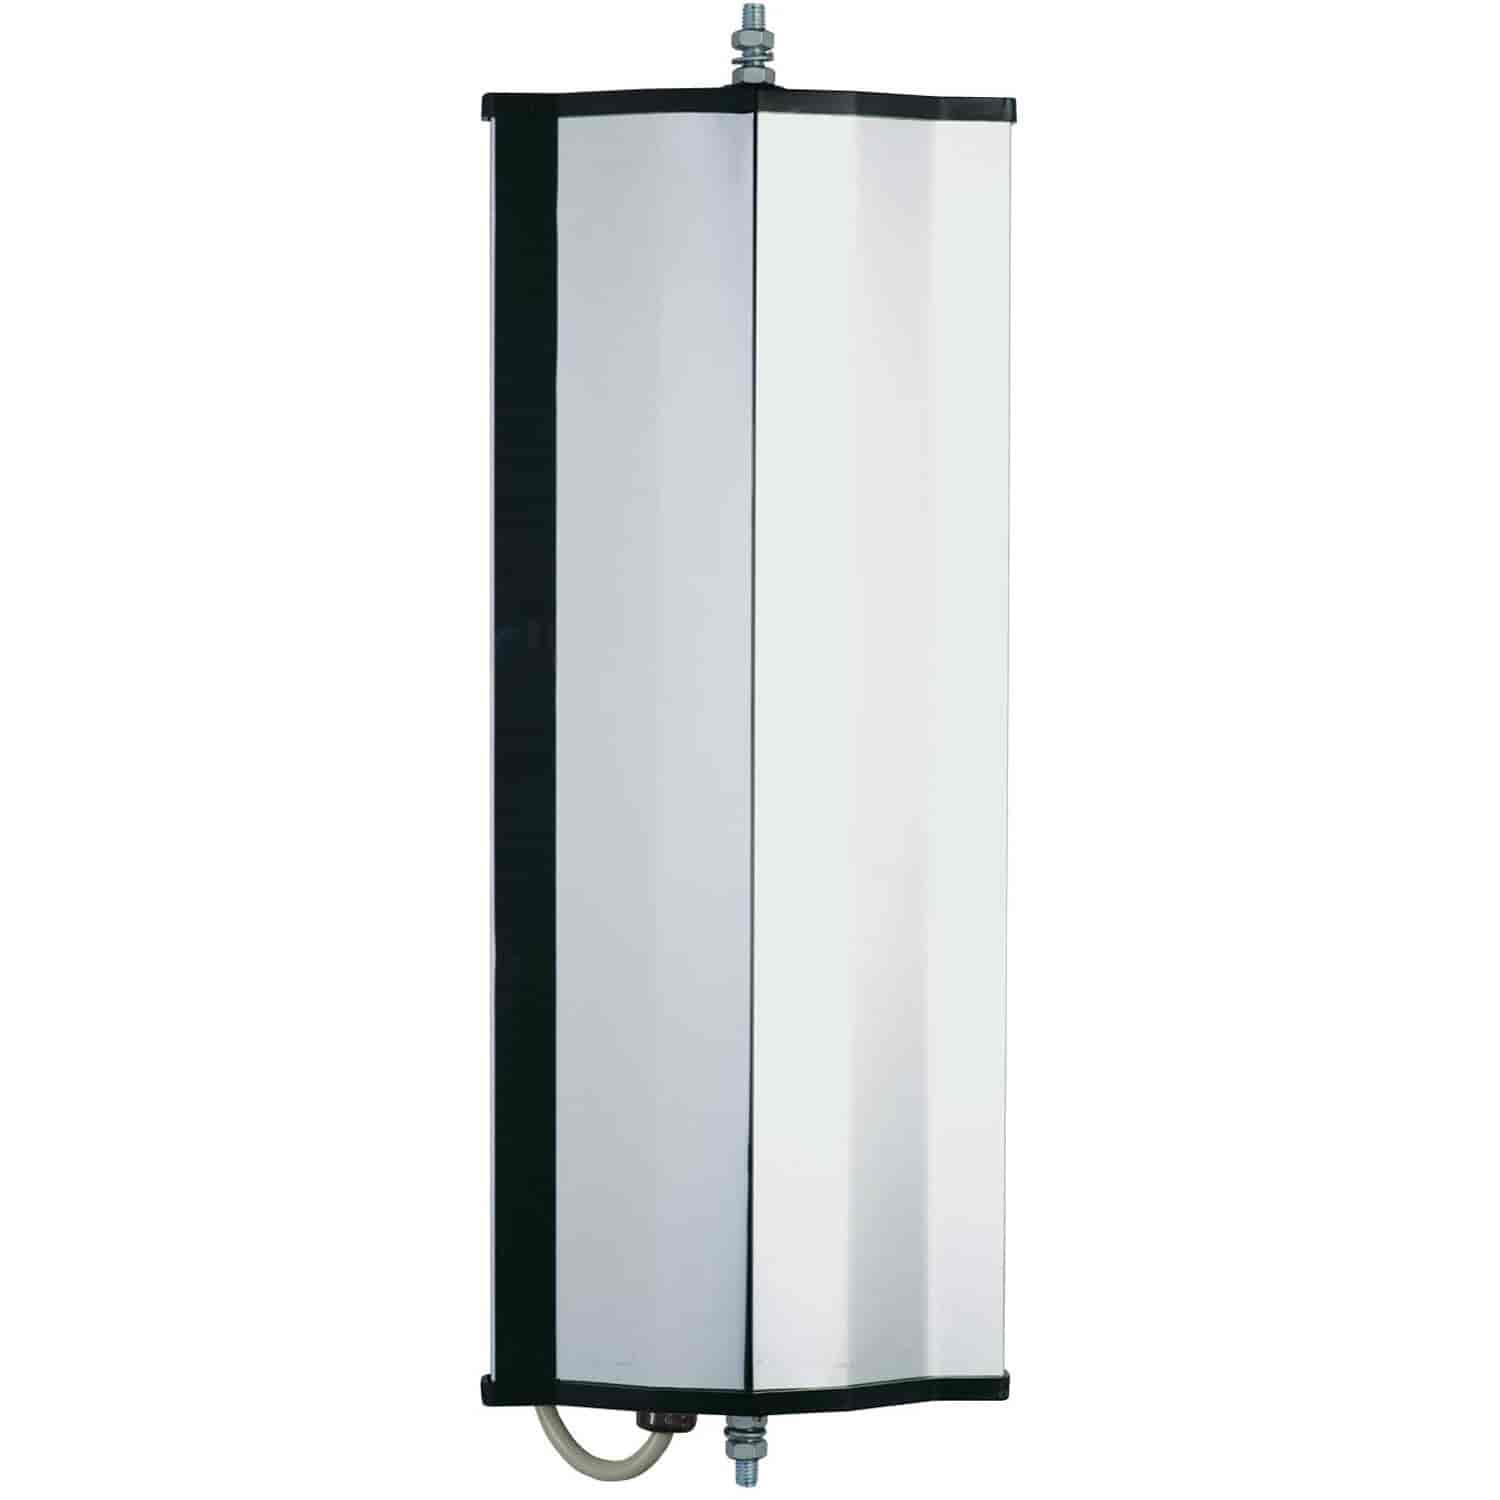 Replacement West Coast Mirror head HD economy 6x16 SS heated Easy bolt on installation Heated Stainless Steel.